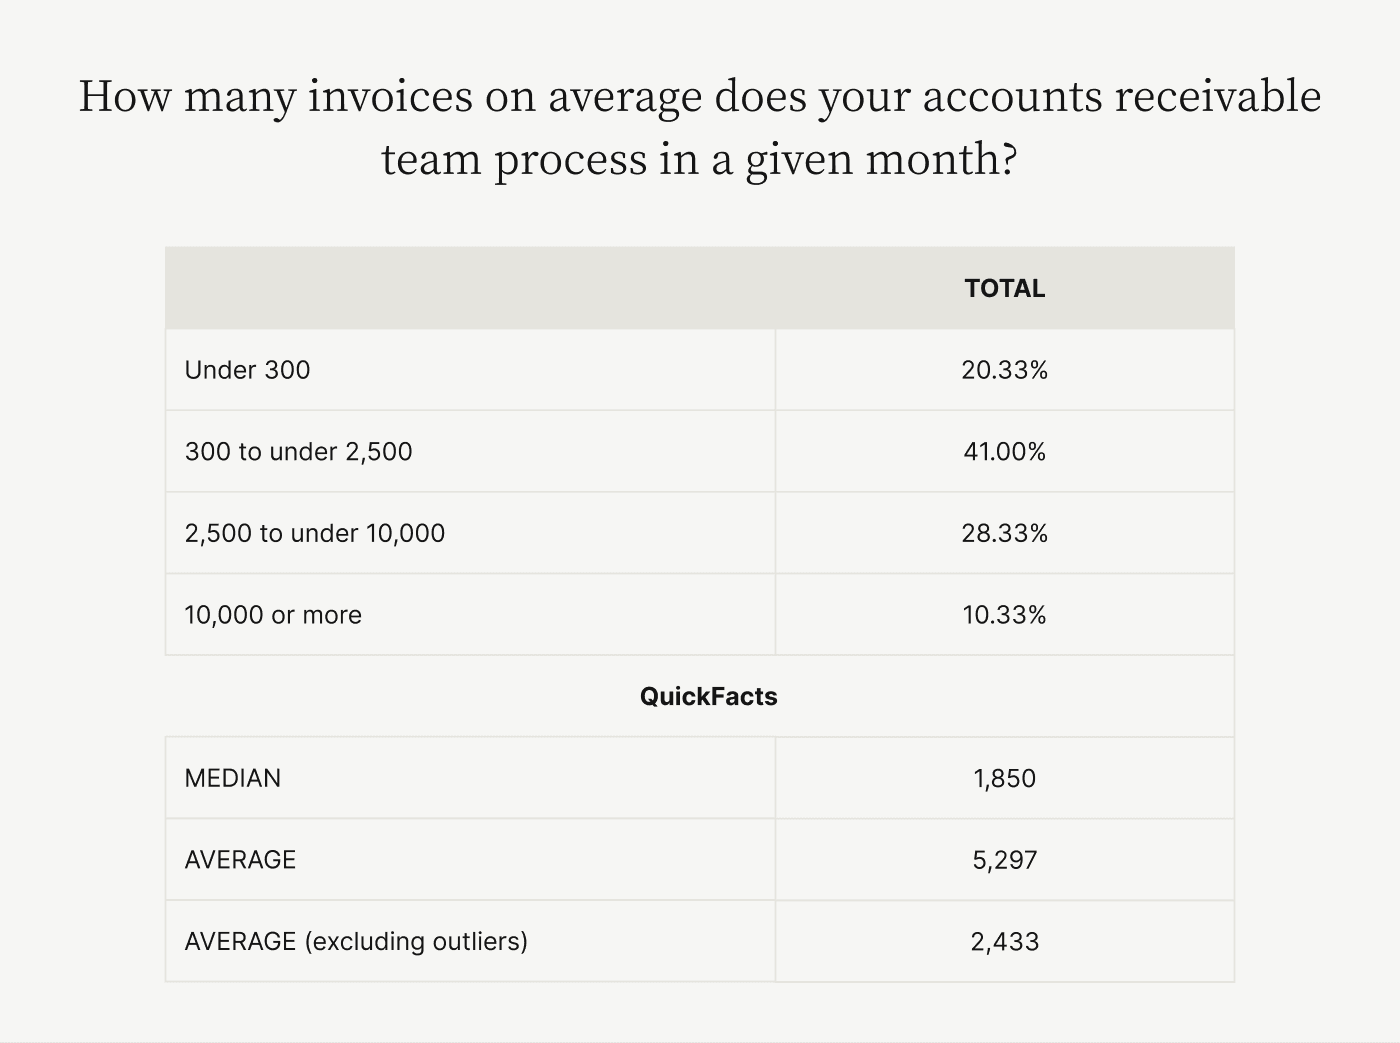 How many invoices on average does your accounts receivable team process in a given month?